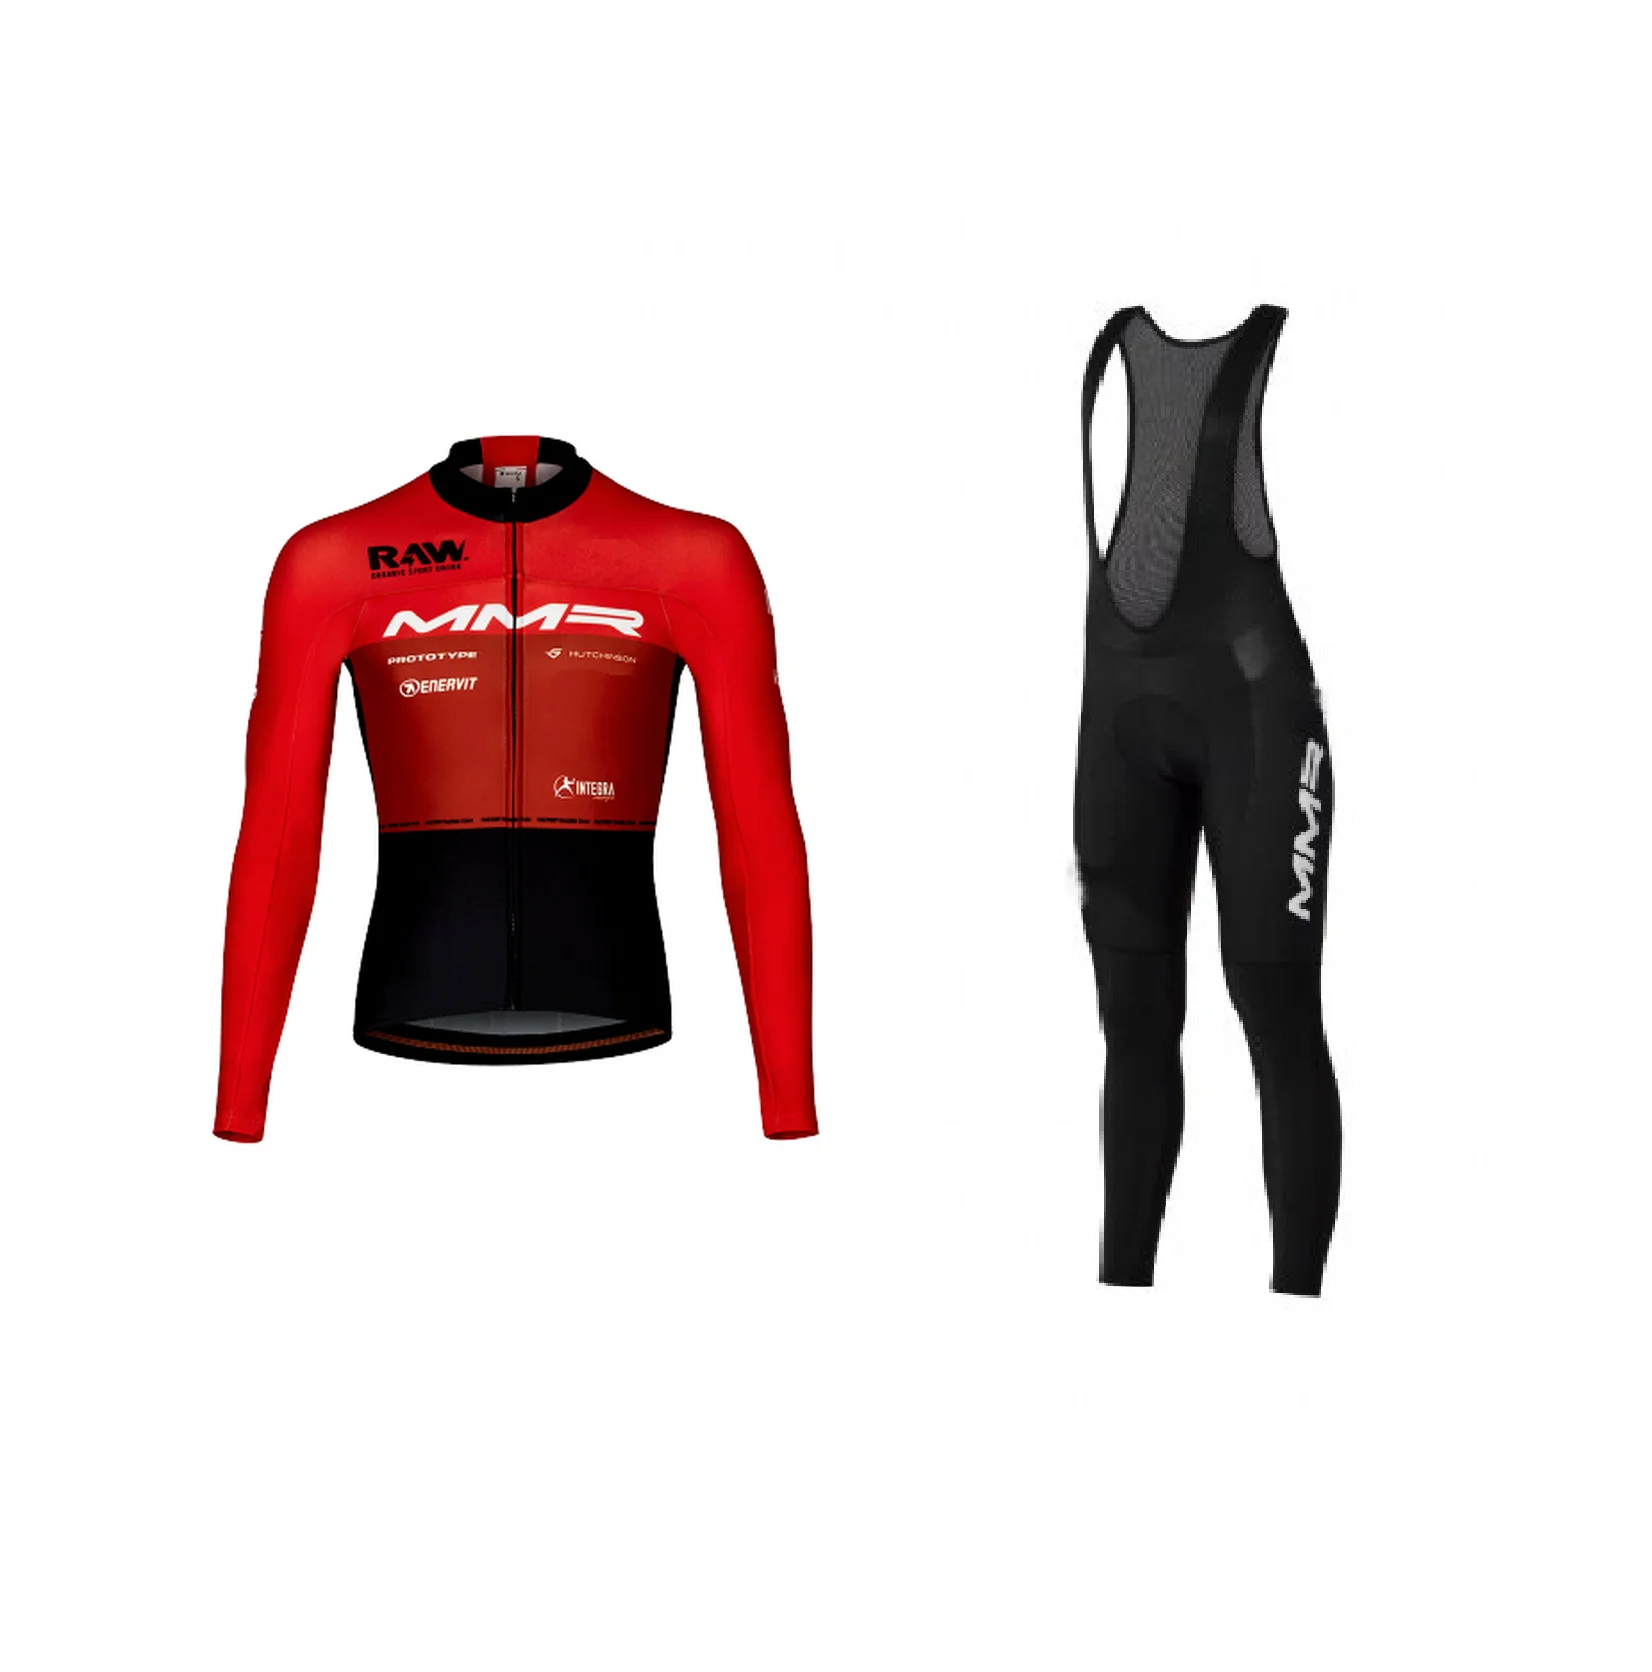 

WINTER FLEECE THERMAL 2023 MMR FACTORY RACING TEAM Cycling Jersey Long Sleeve Bicycle Clothing With Bib PANTS Ropa Ciclismo